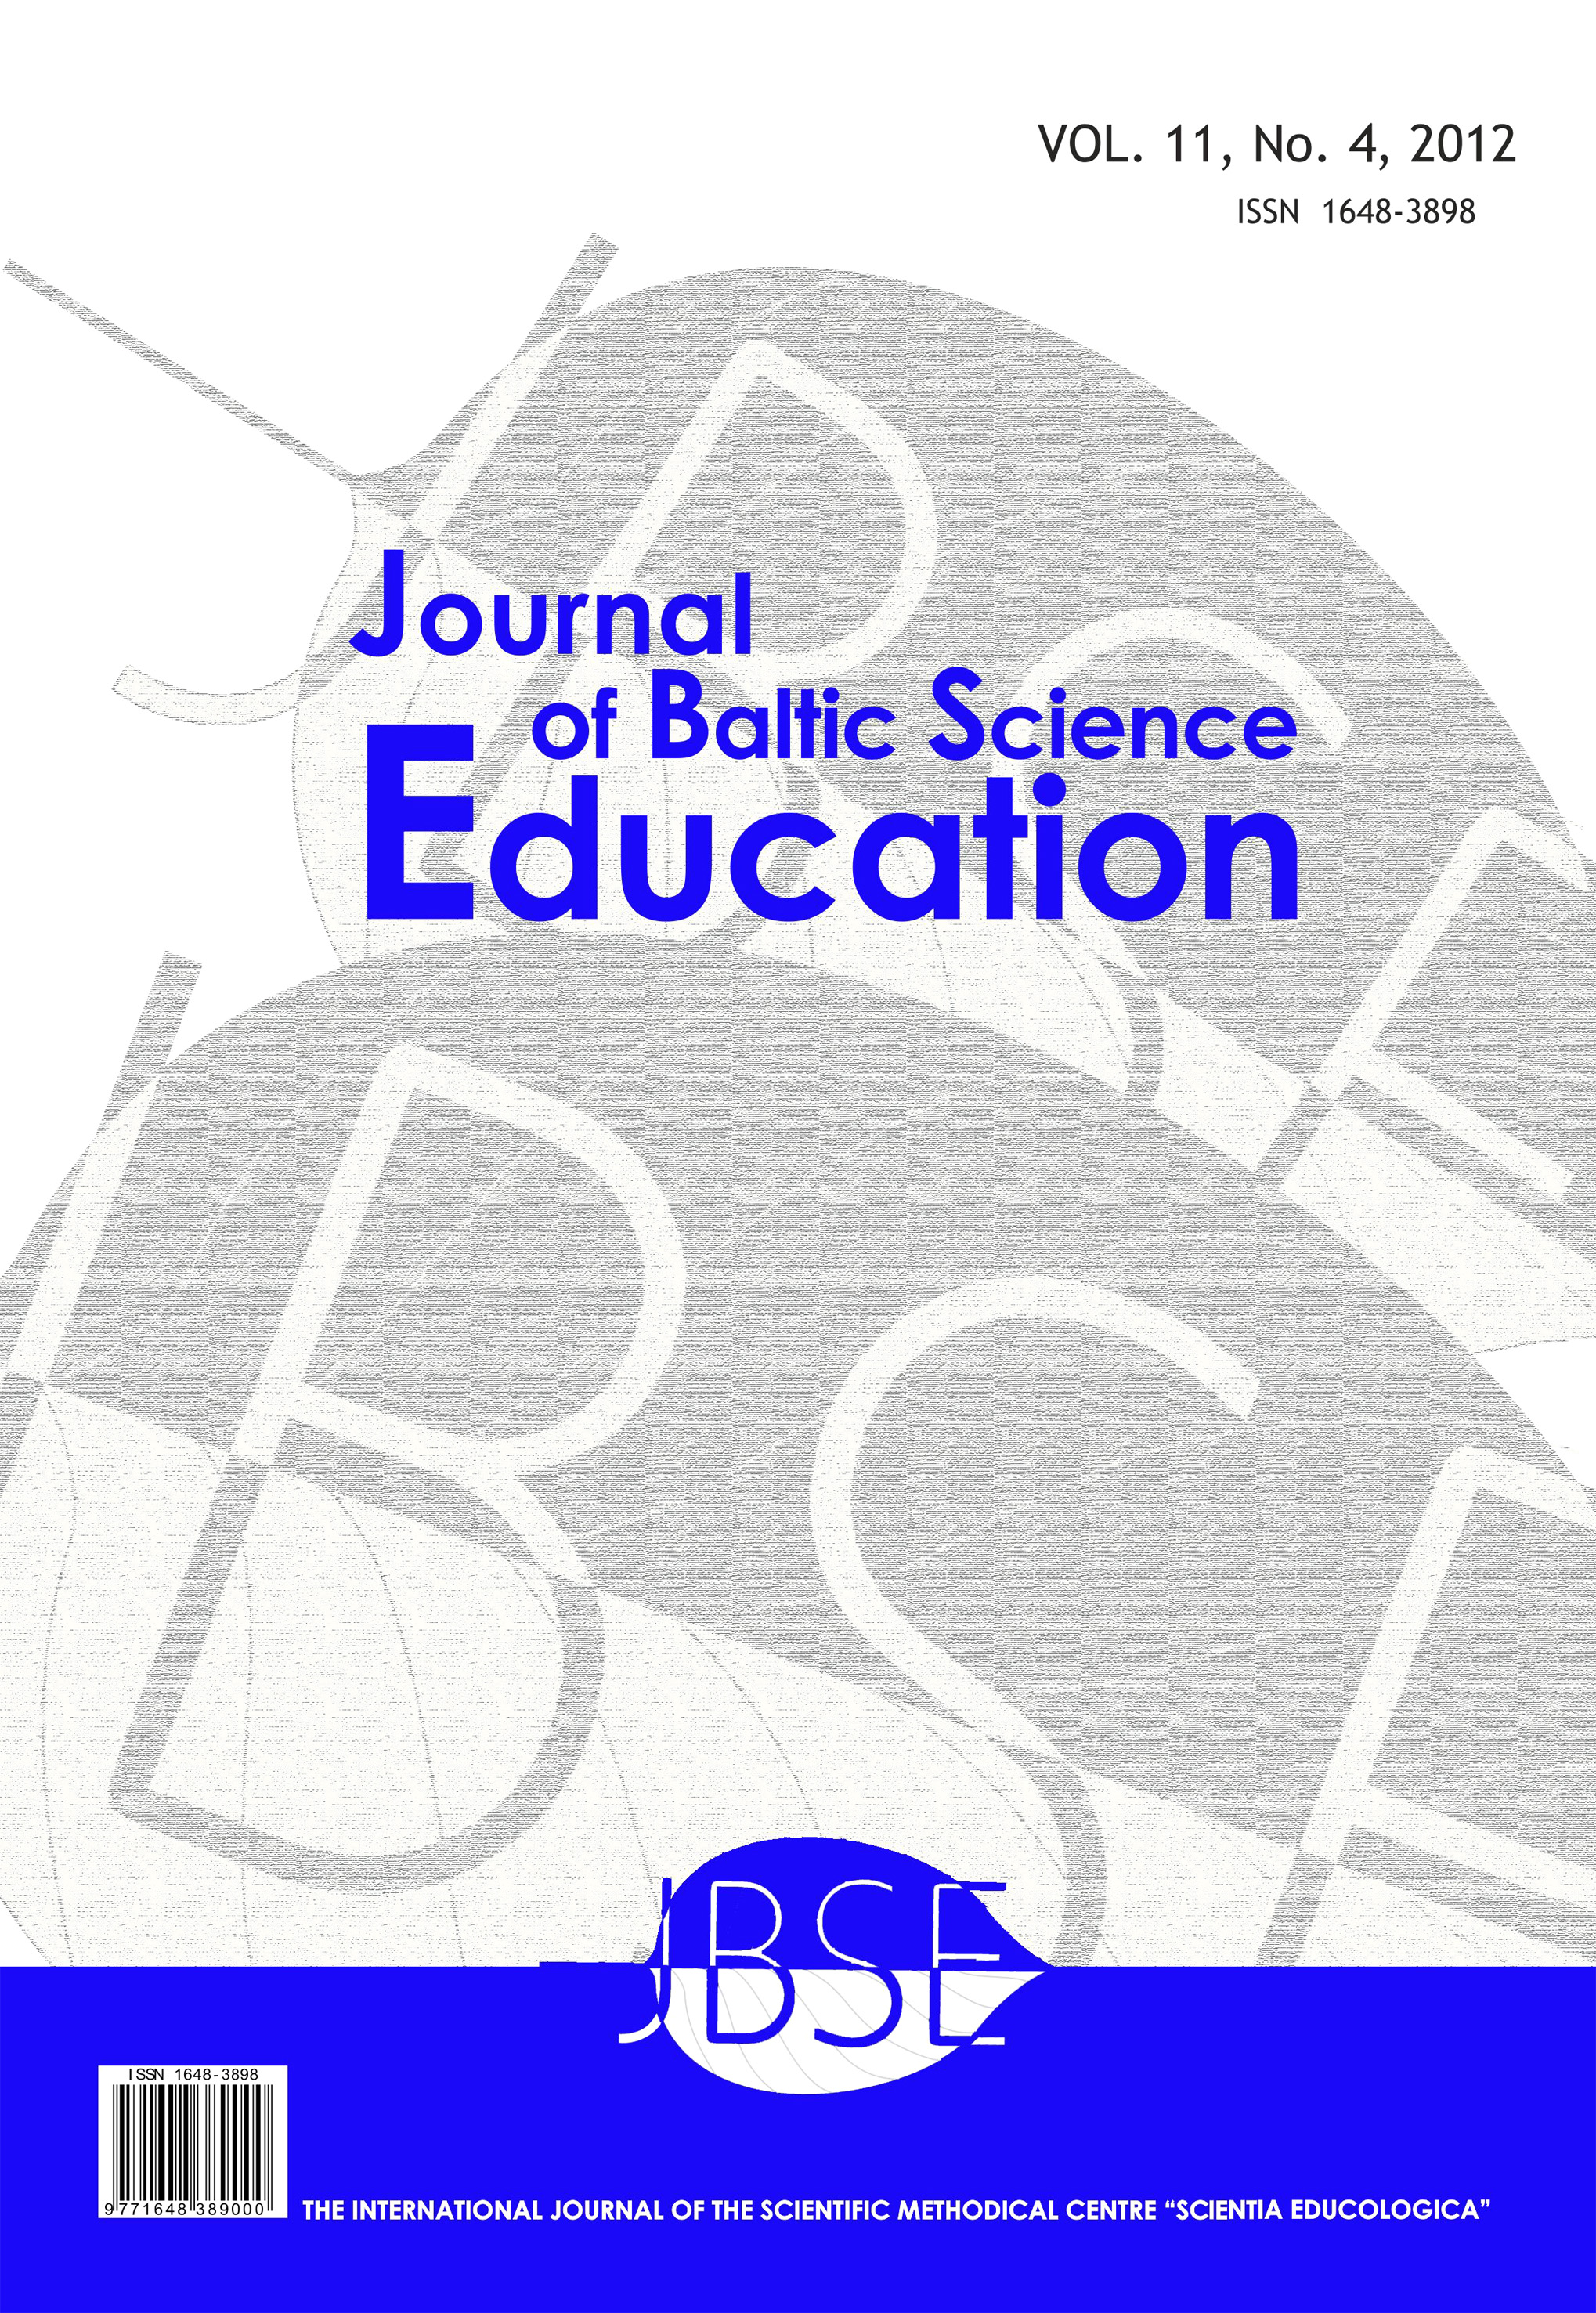 SCIENCE TEACHERS’ BELIEFS AS BARRIERS TO IMPLEMENTATION OF CONSTRUCTIVIST-BASED EDUCATION REFORM Cover Image